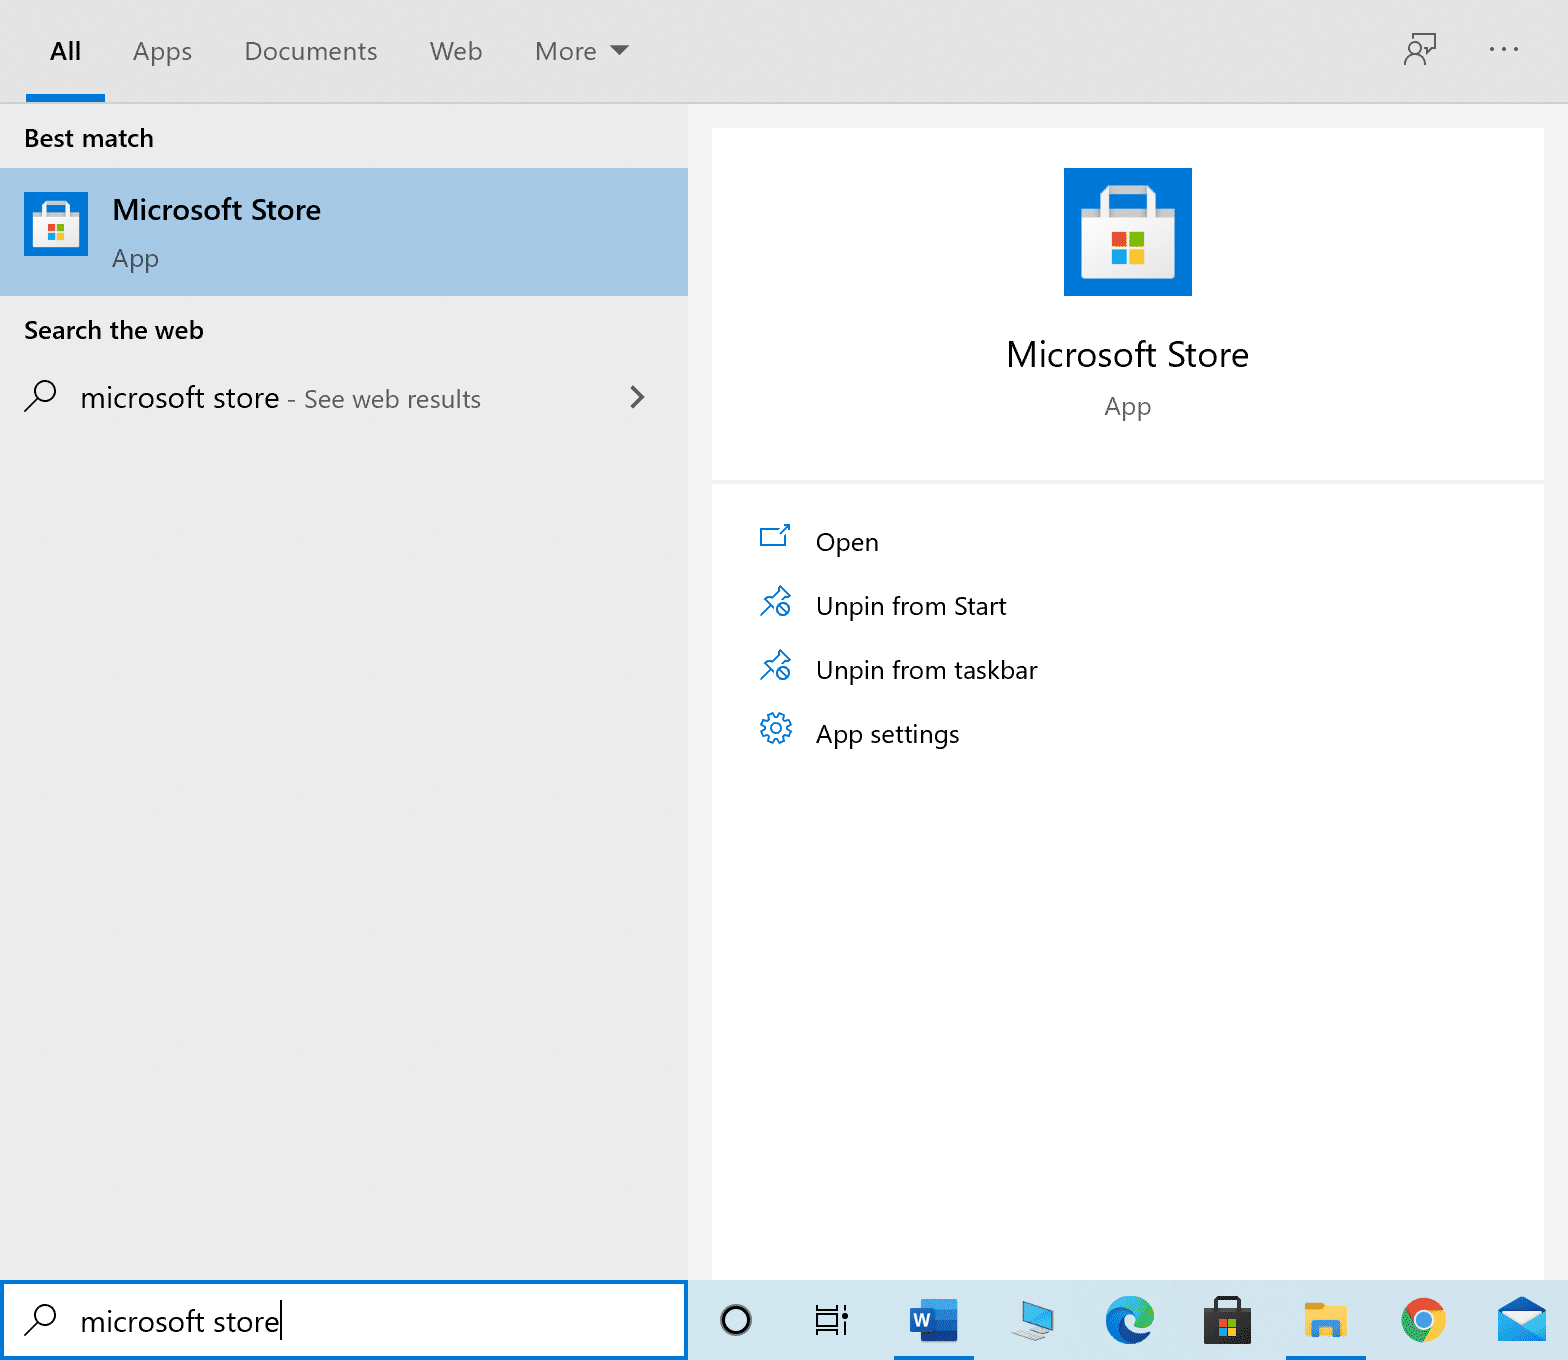 Launch Microsoft Store from windows search